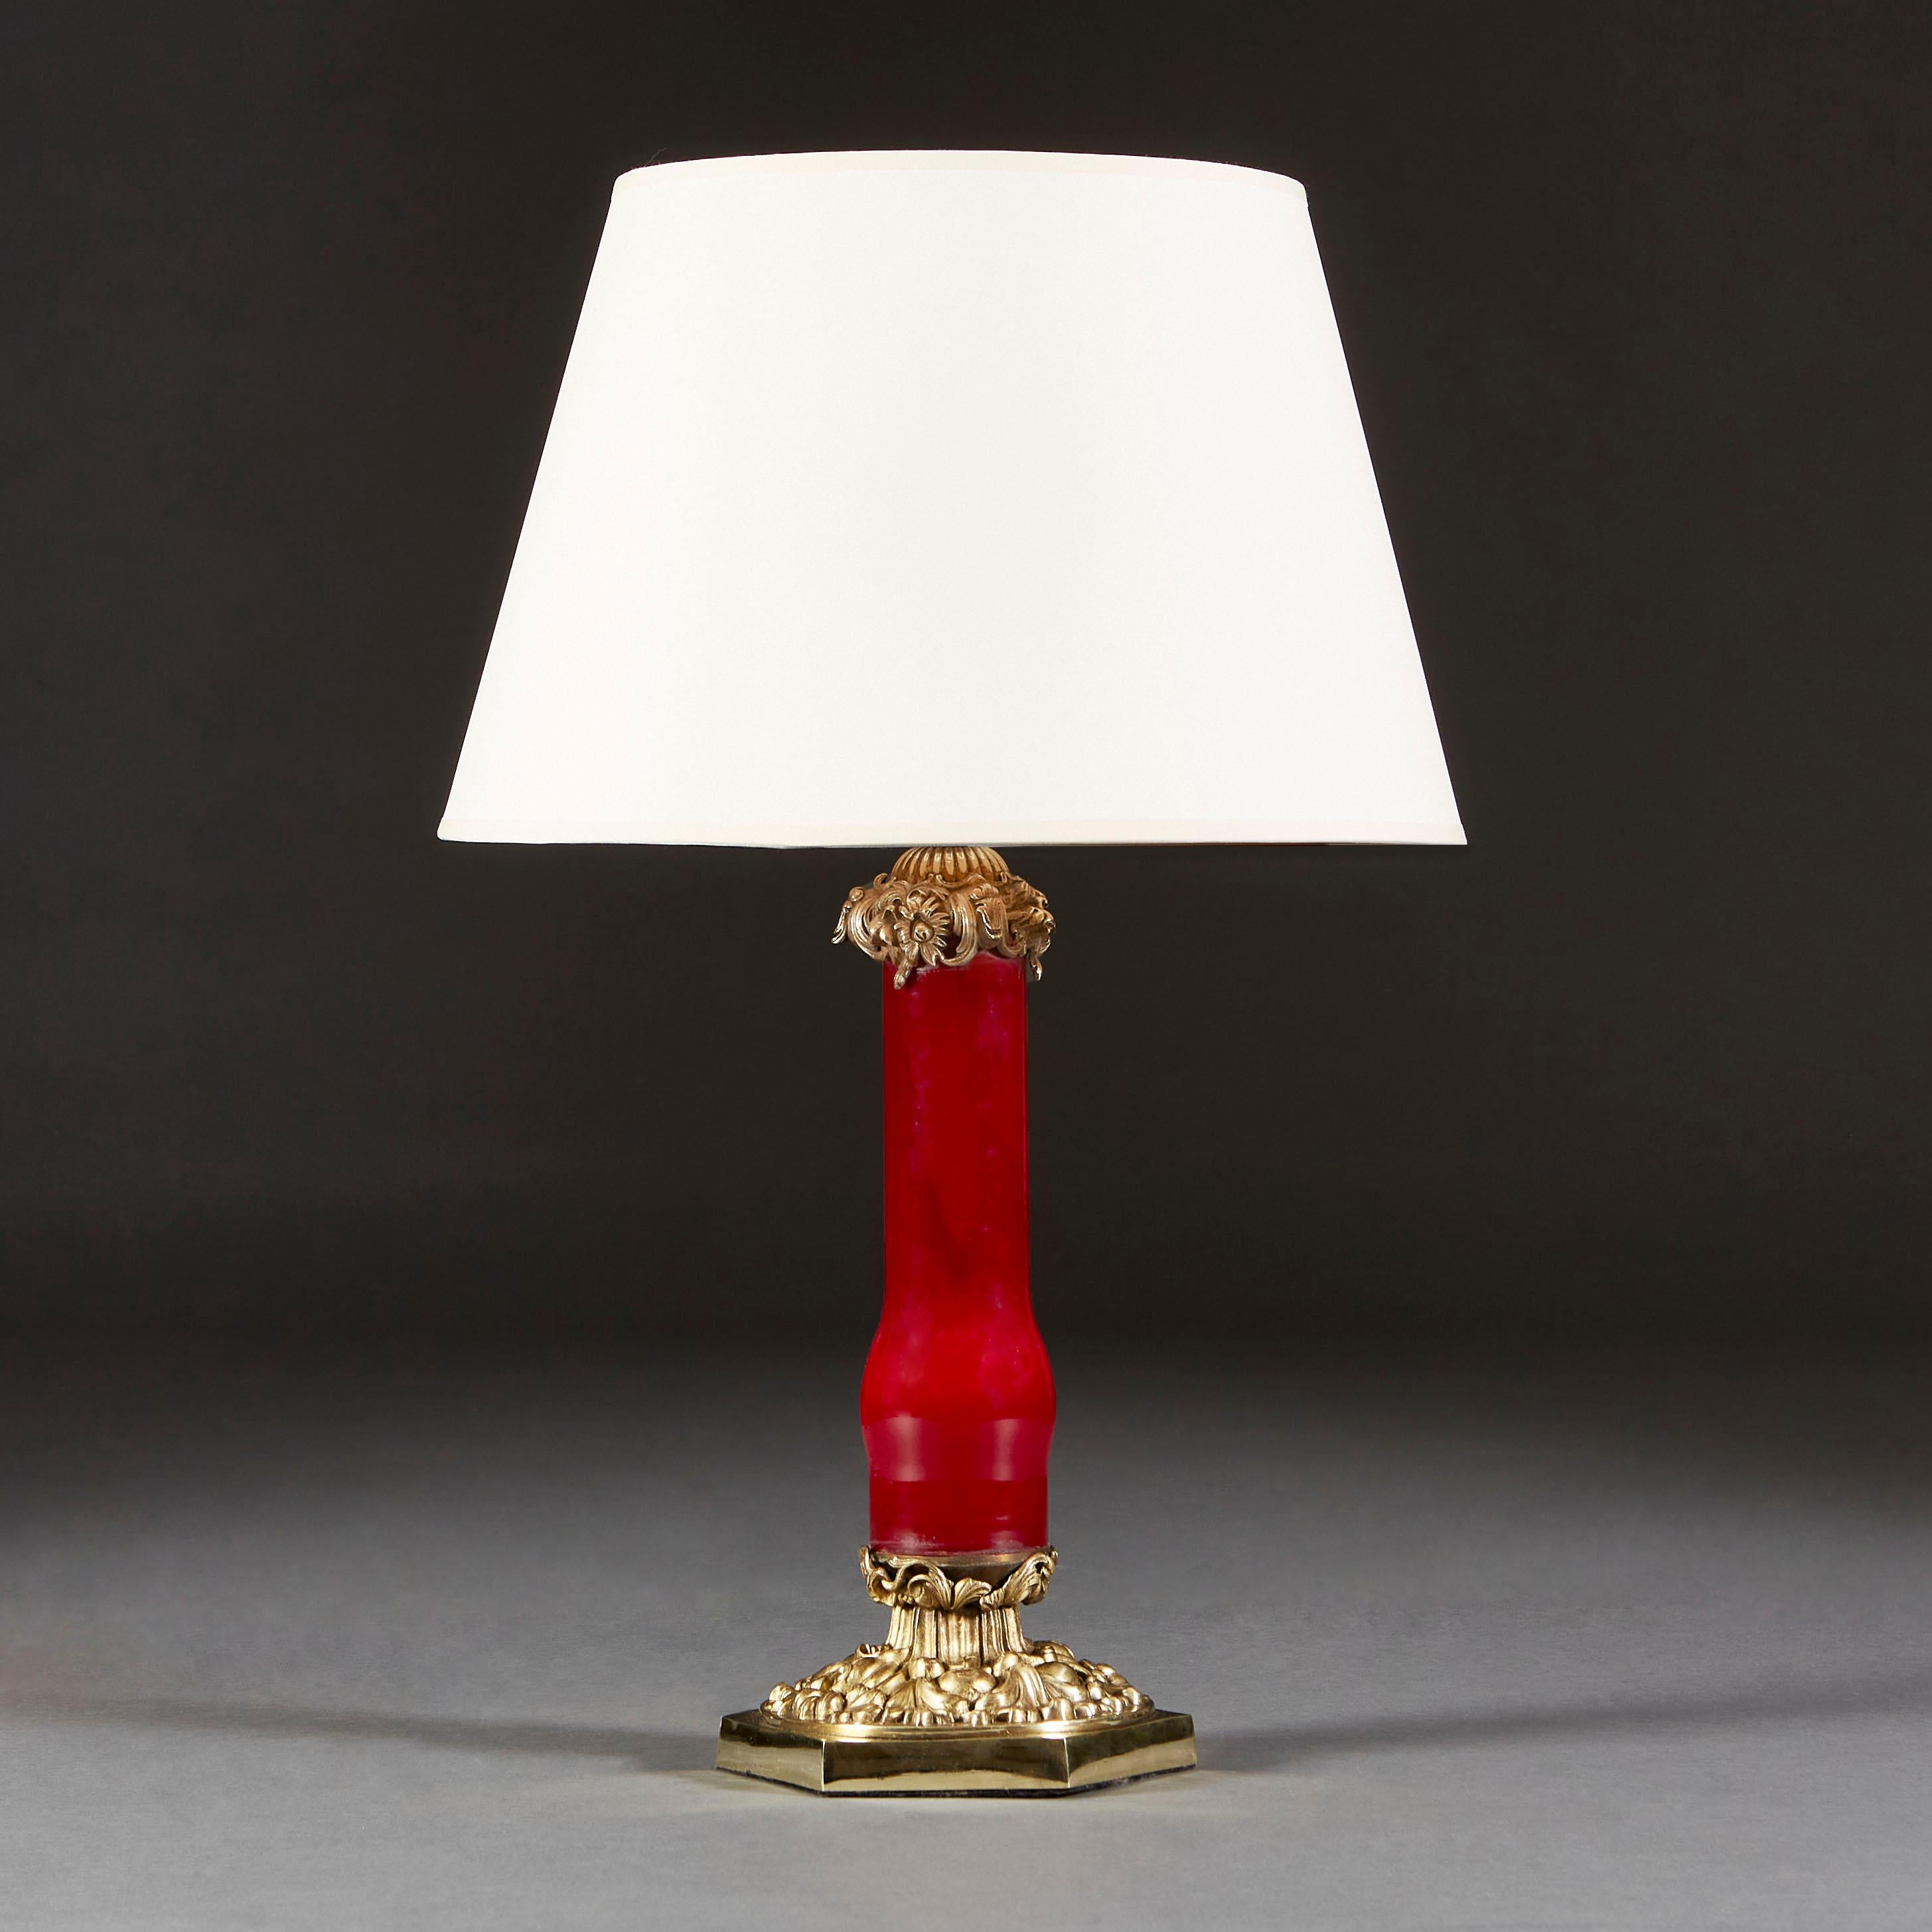 A mid nineteenth century red glass column lamp, with brass lead decoration to the top and to the base. All supported on a brass hexagonal base.

Currently wired for the UK.

Please note: Lampshade not included.